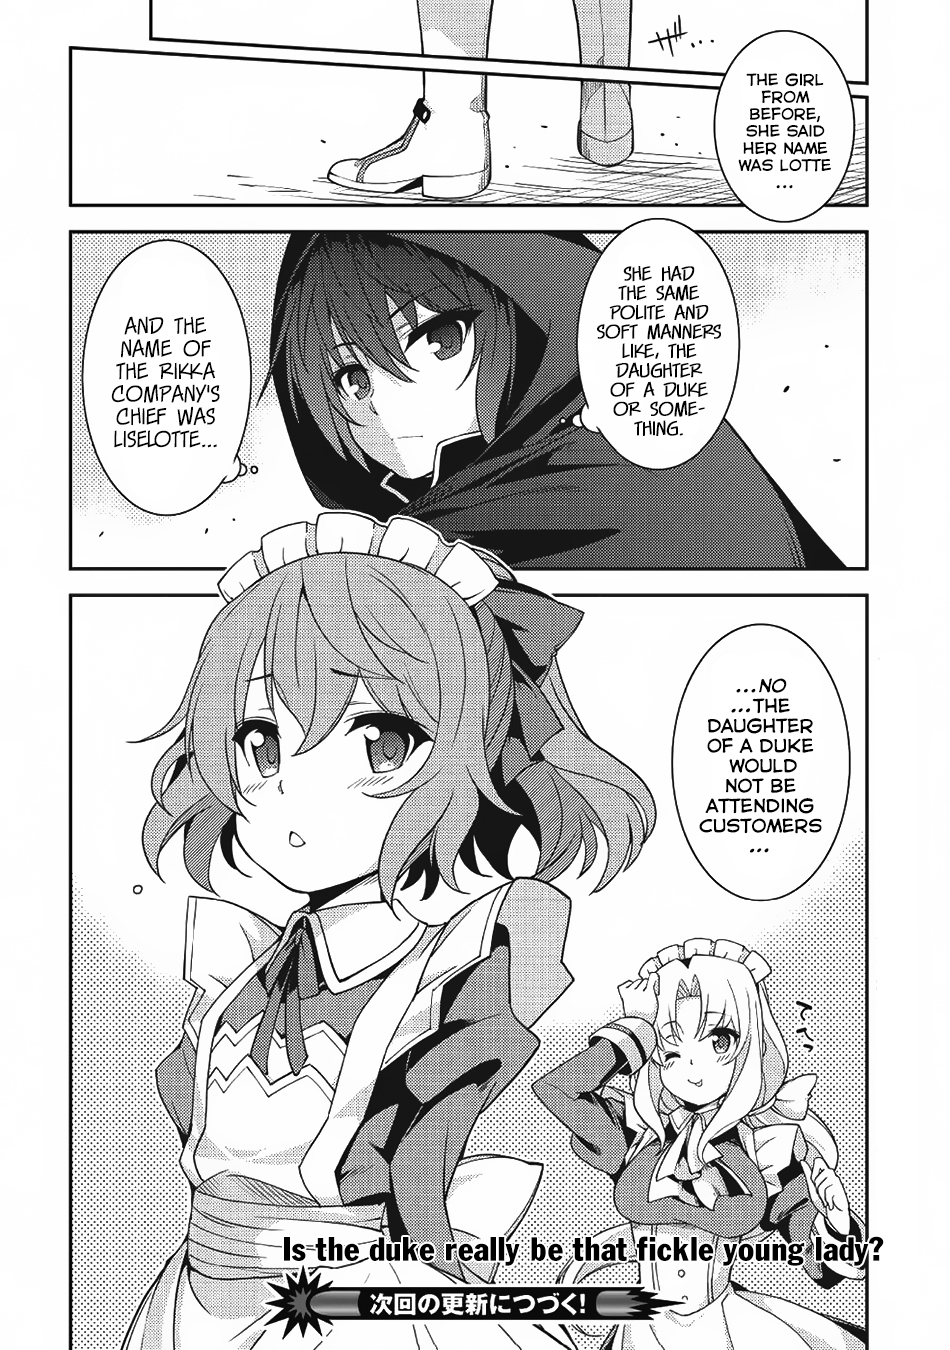 Seirei Gensouki Vol. 3 Ch. 14 Lotte from the Rikka Company